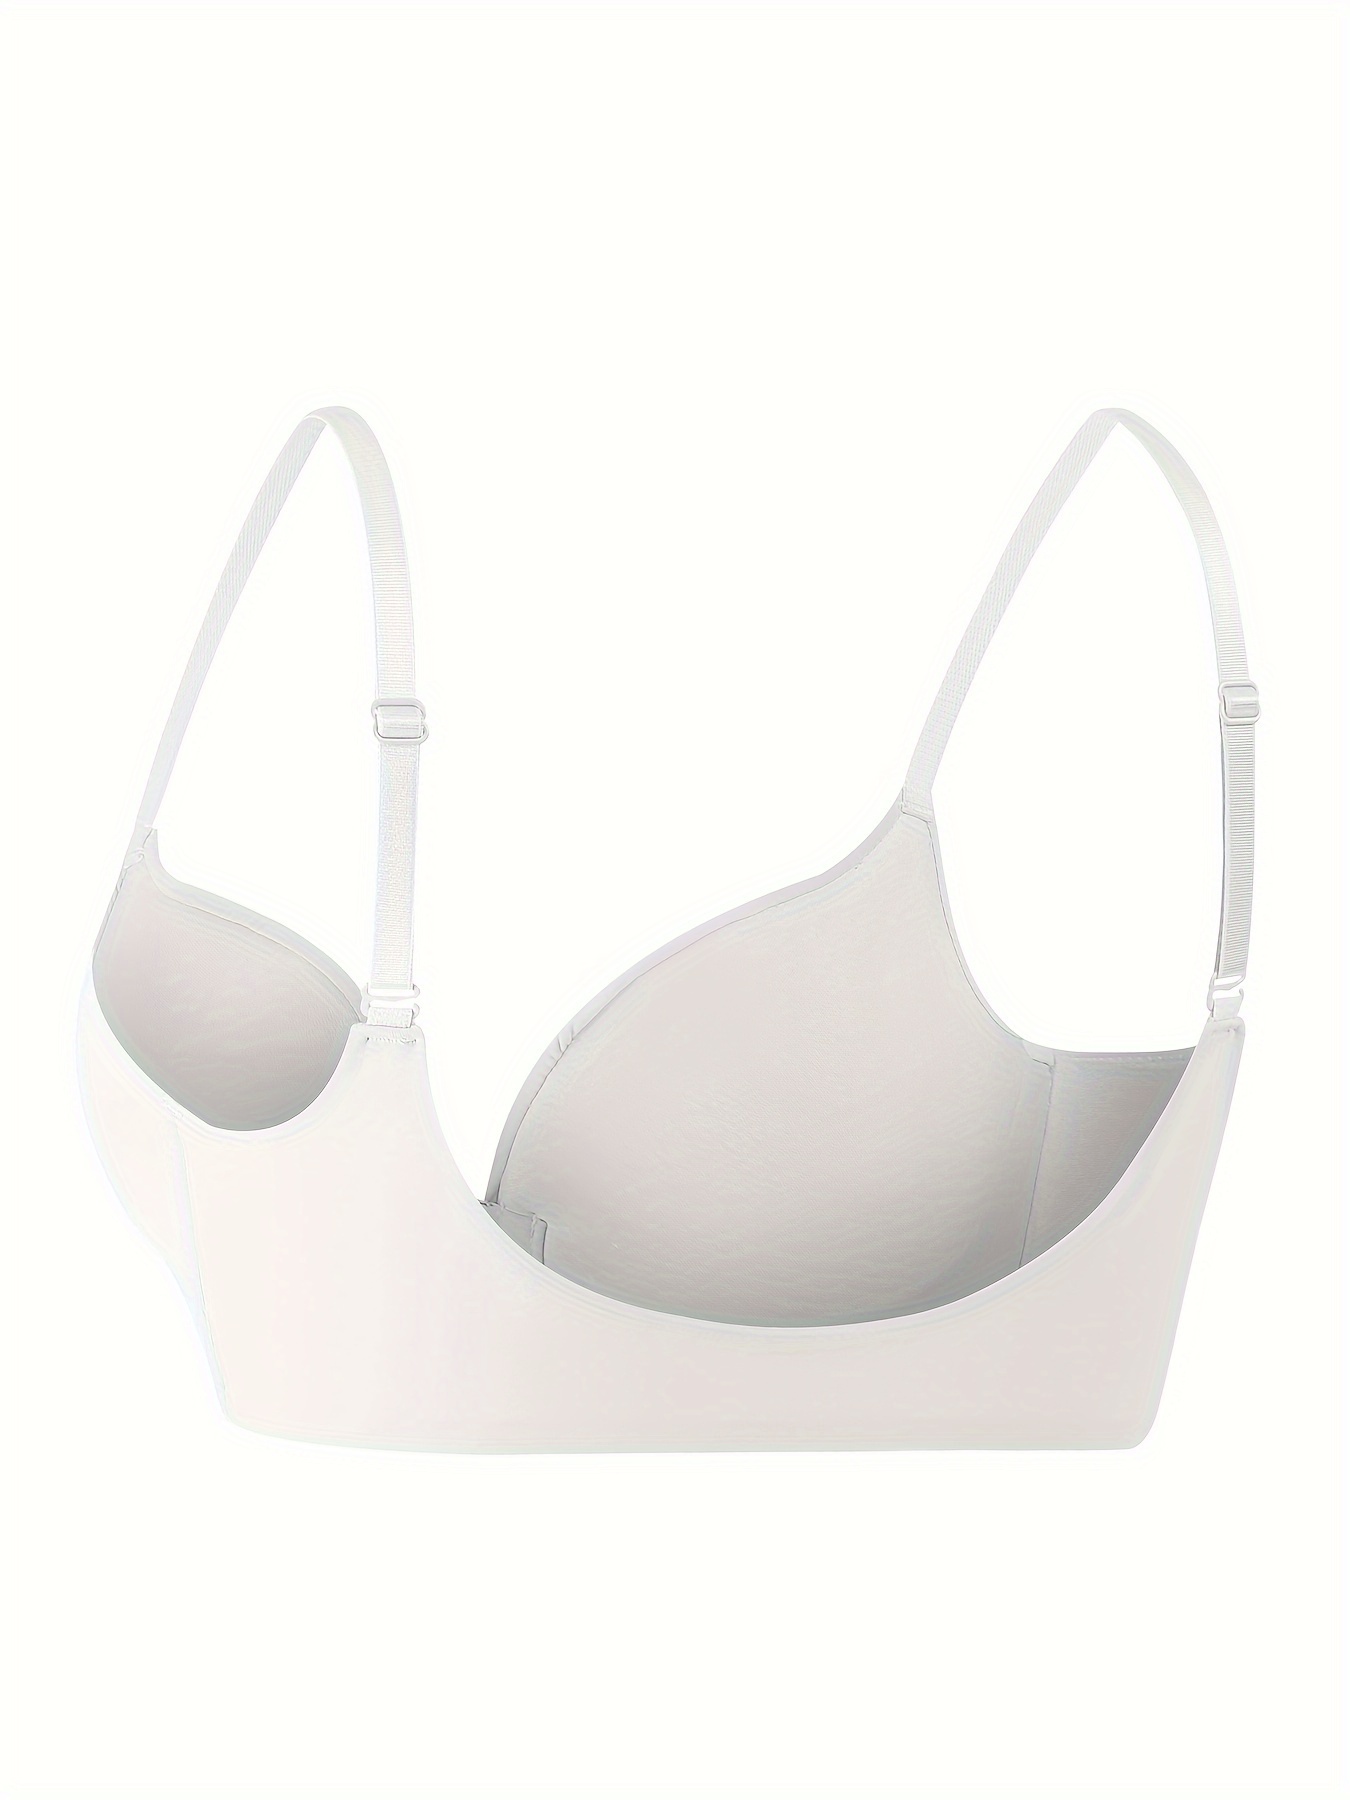 Bras for Women No Underwire Front Buckle Beautiful Thin Wireless